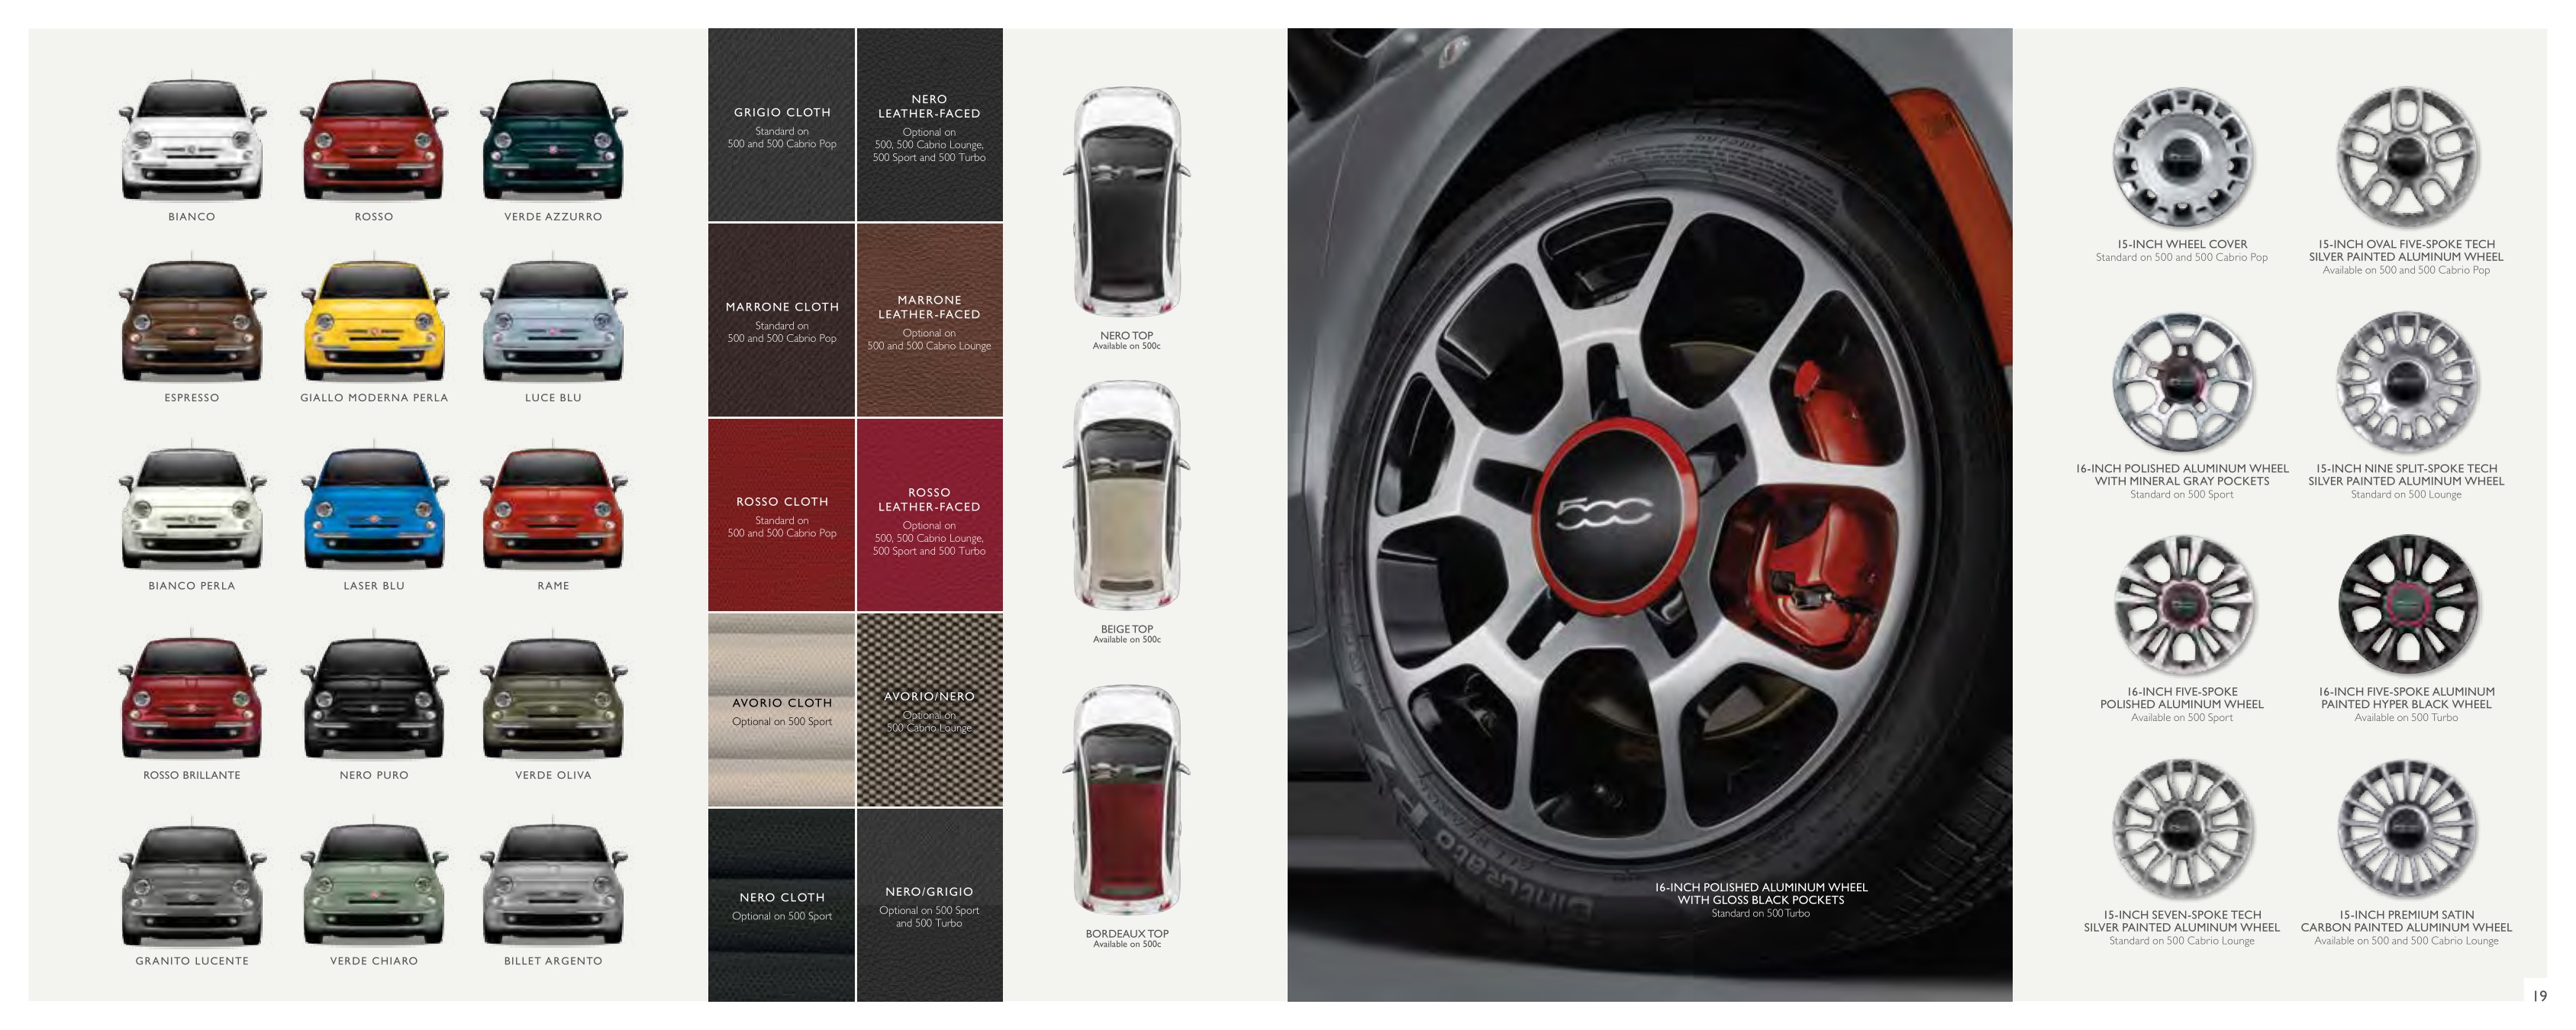 2015 Fiat 500 Brochure Page 15